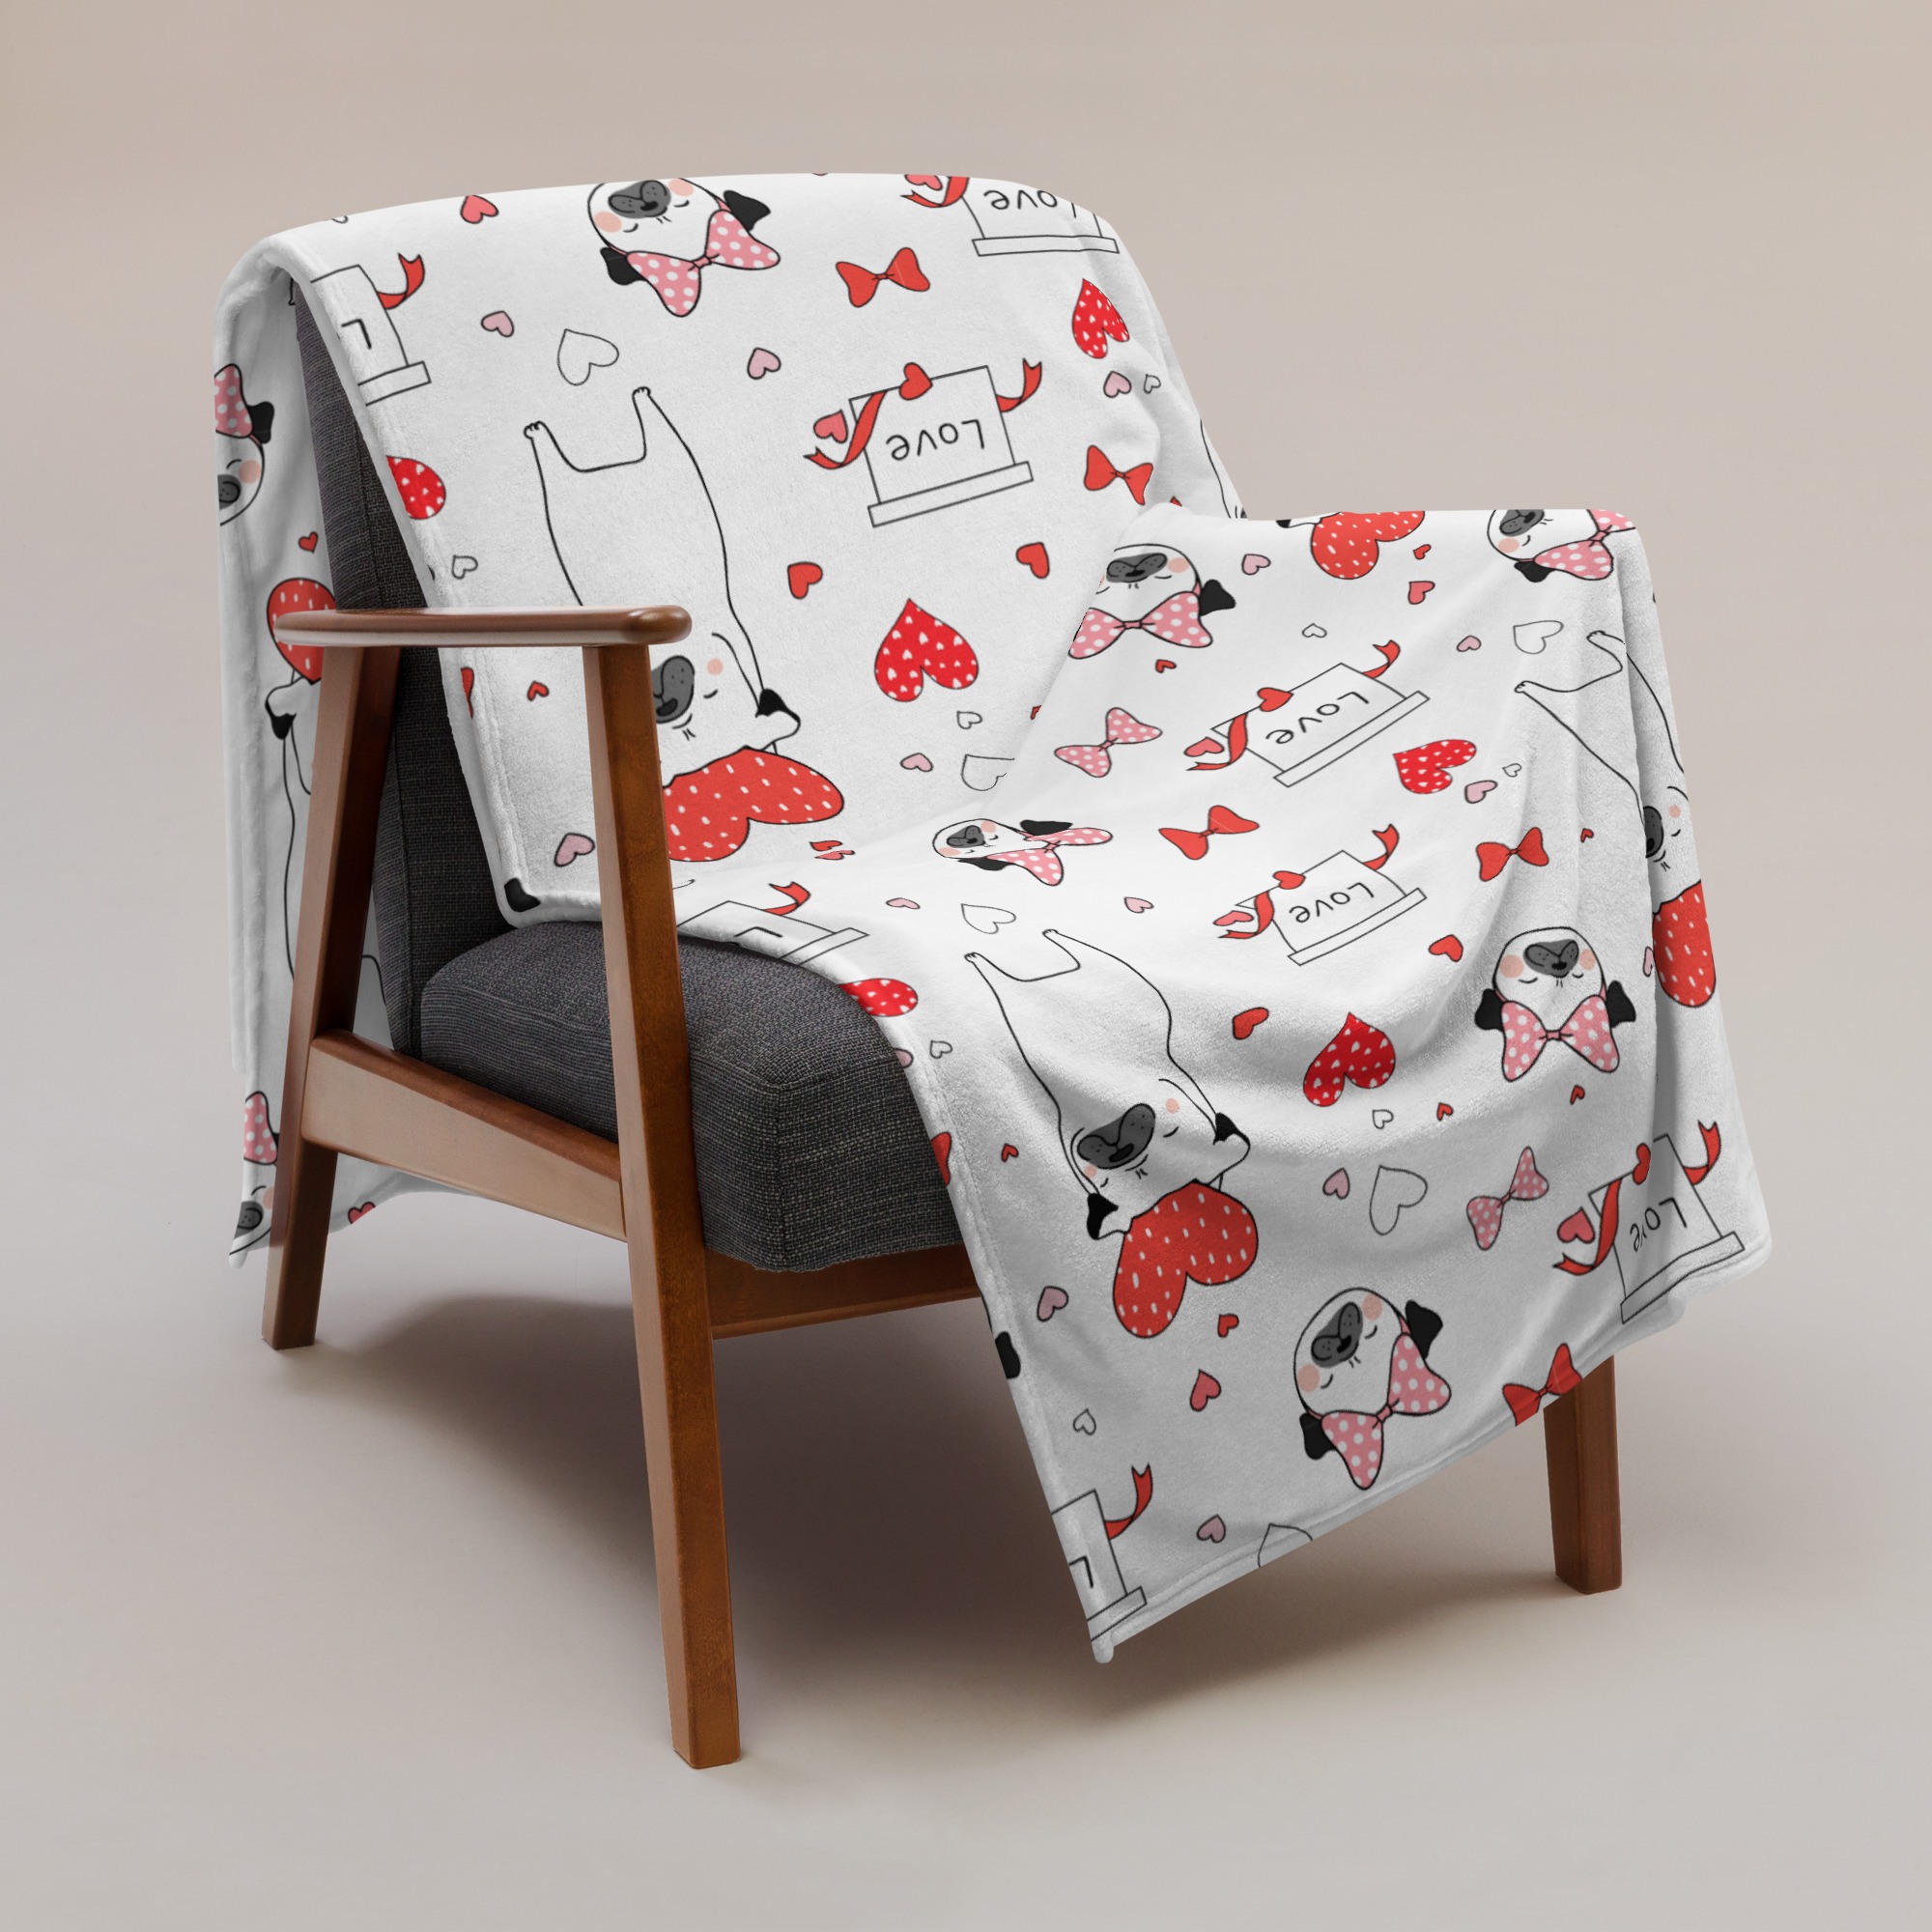 "pugs and hearts" throw blanket